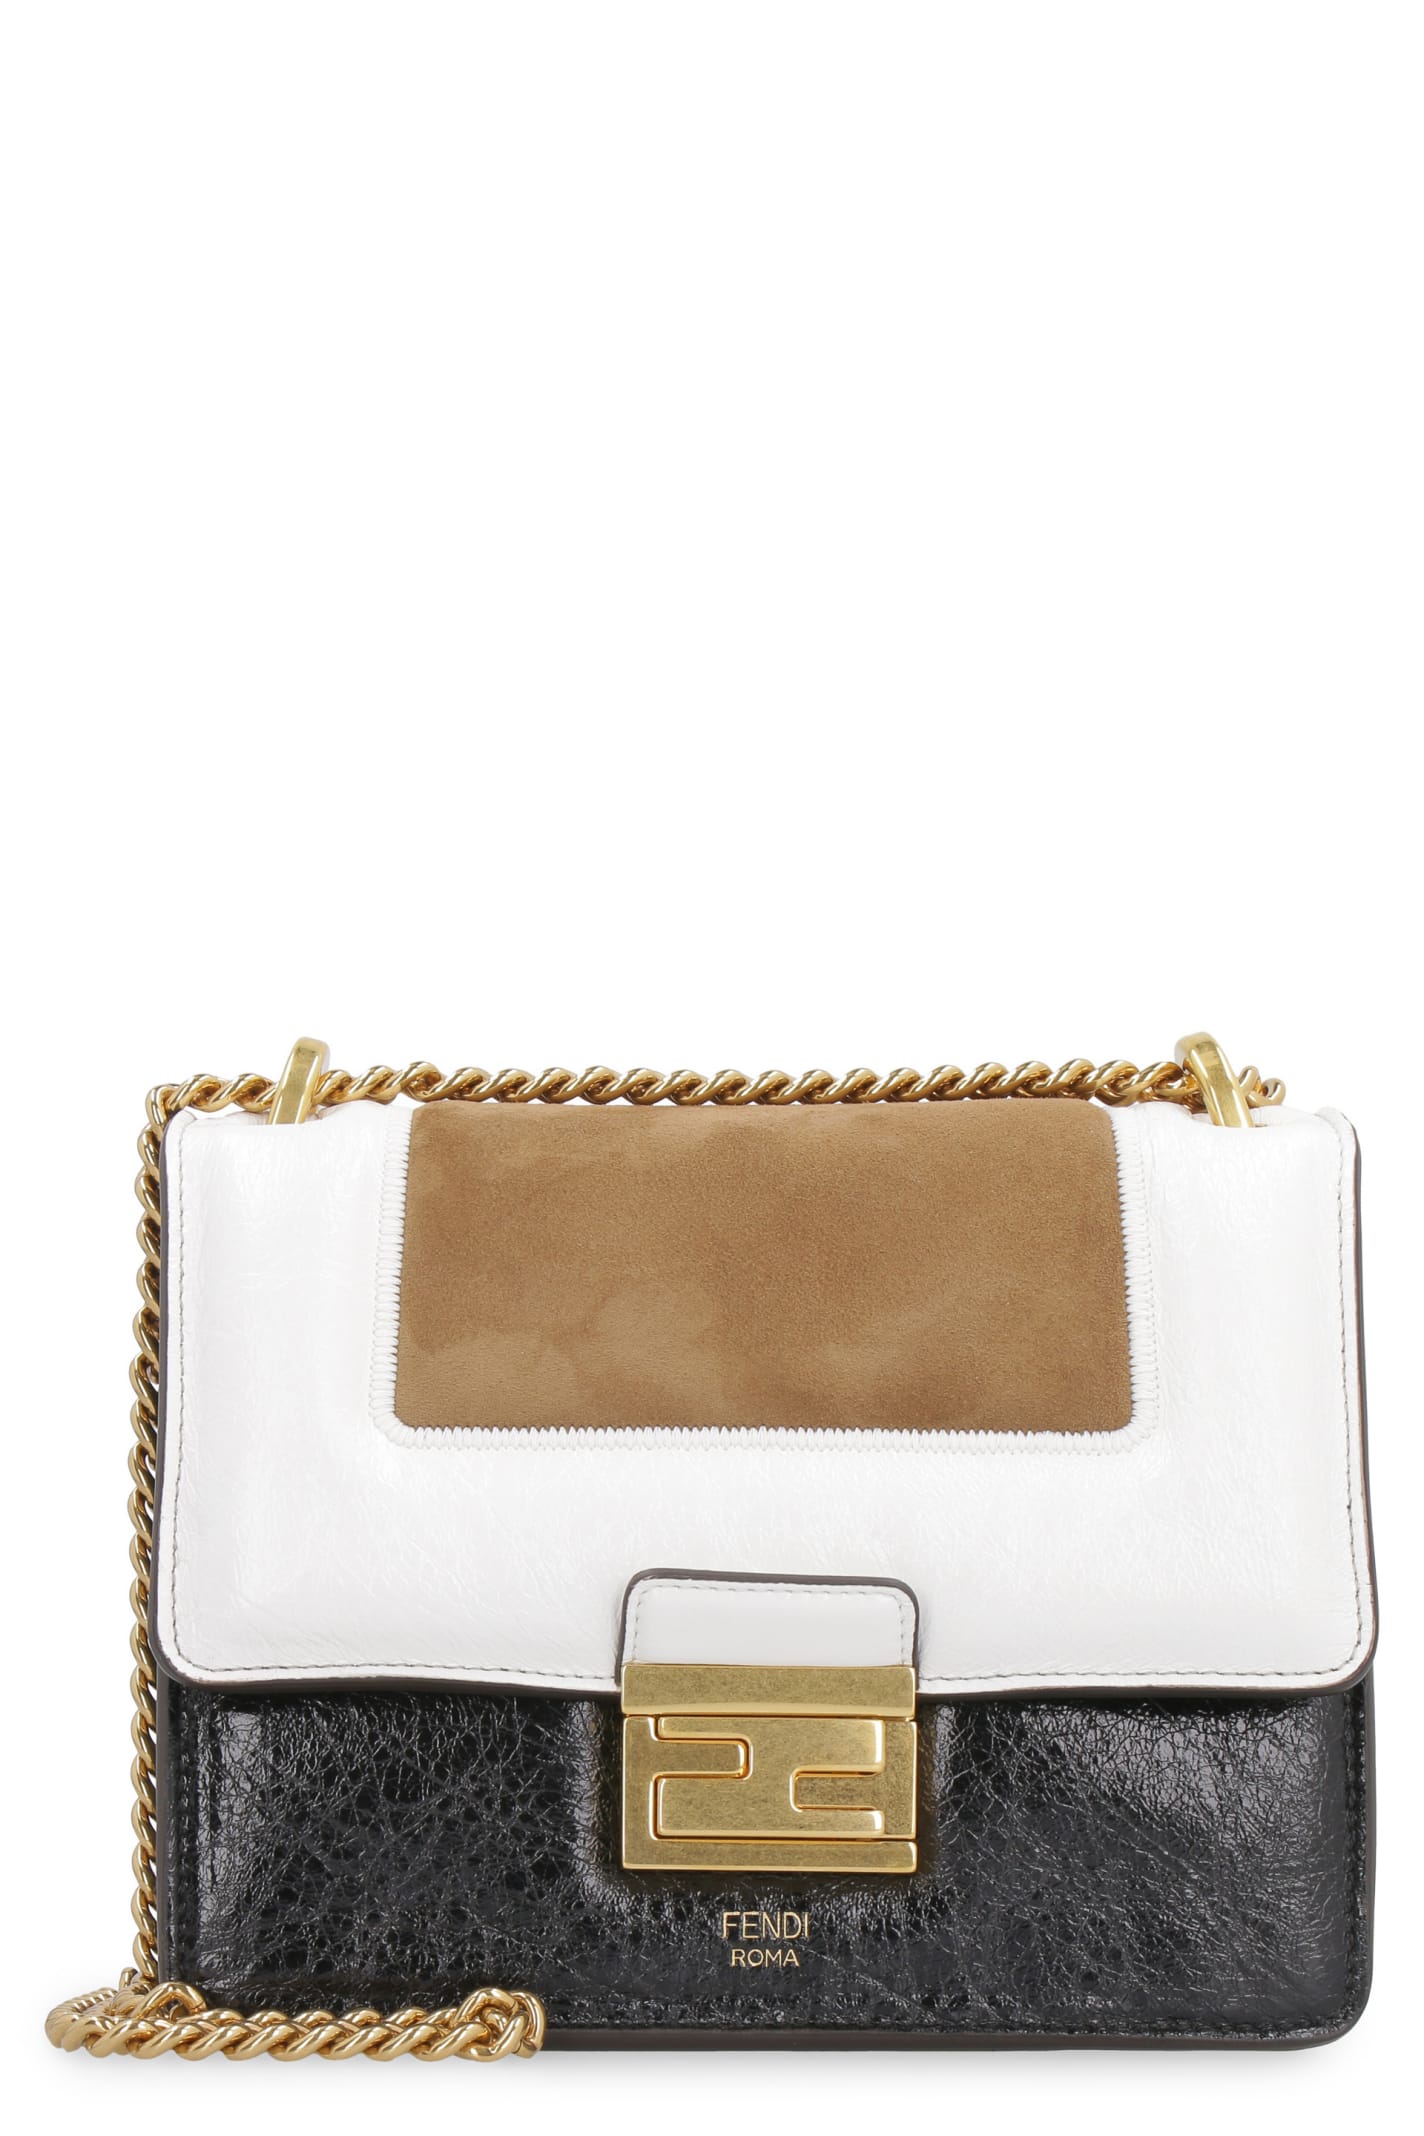 Fendi Kan U Leather And Suede Crossbody Bag In Multicolor